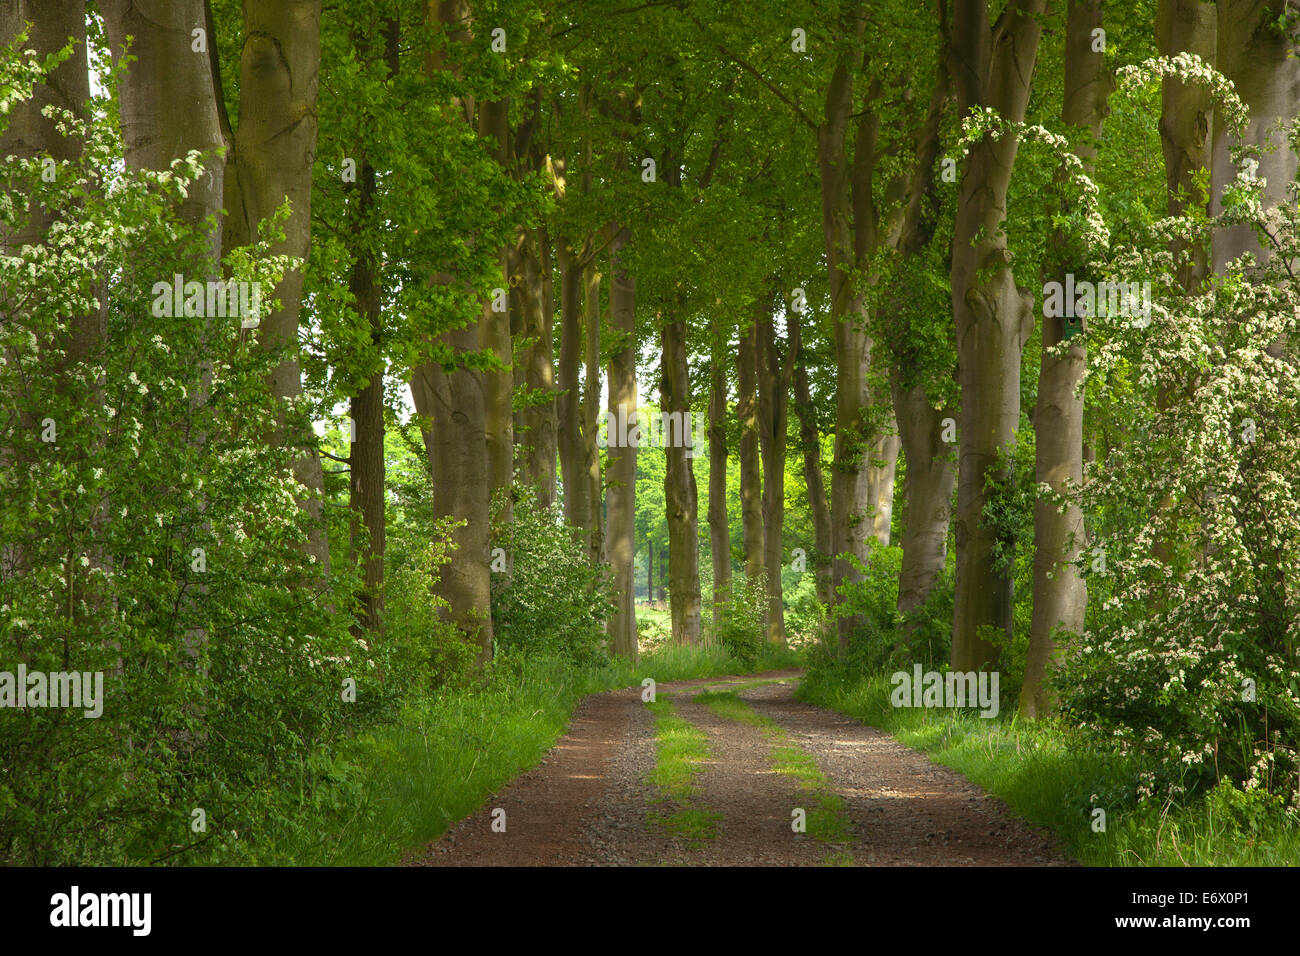 Alley of beach trees, Oldenburger Munsterland, Lower Saxony, Germany Stock Photo